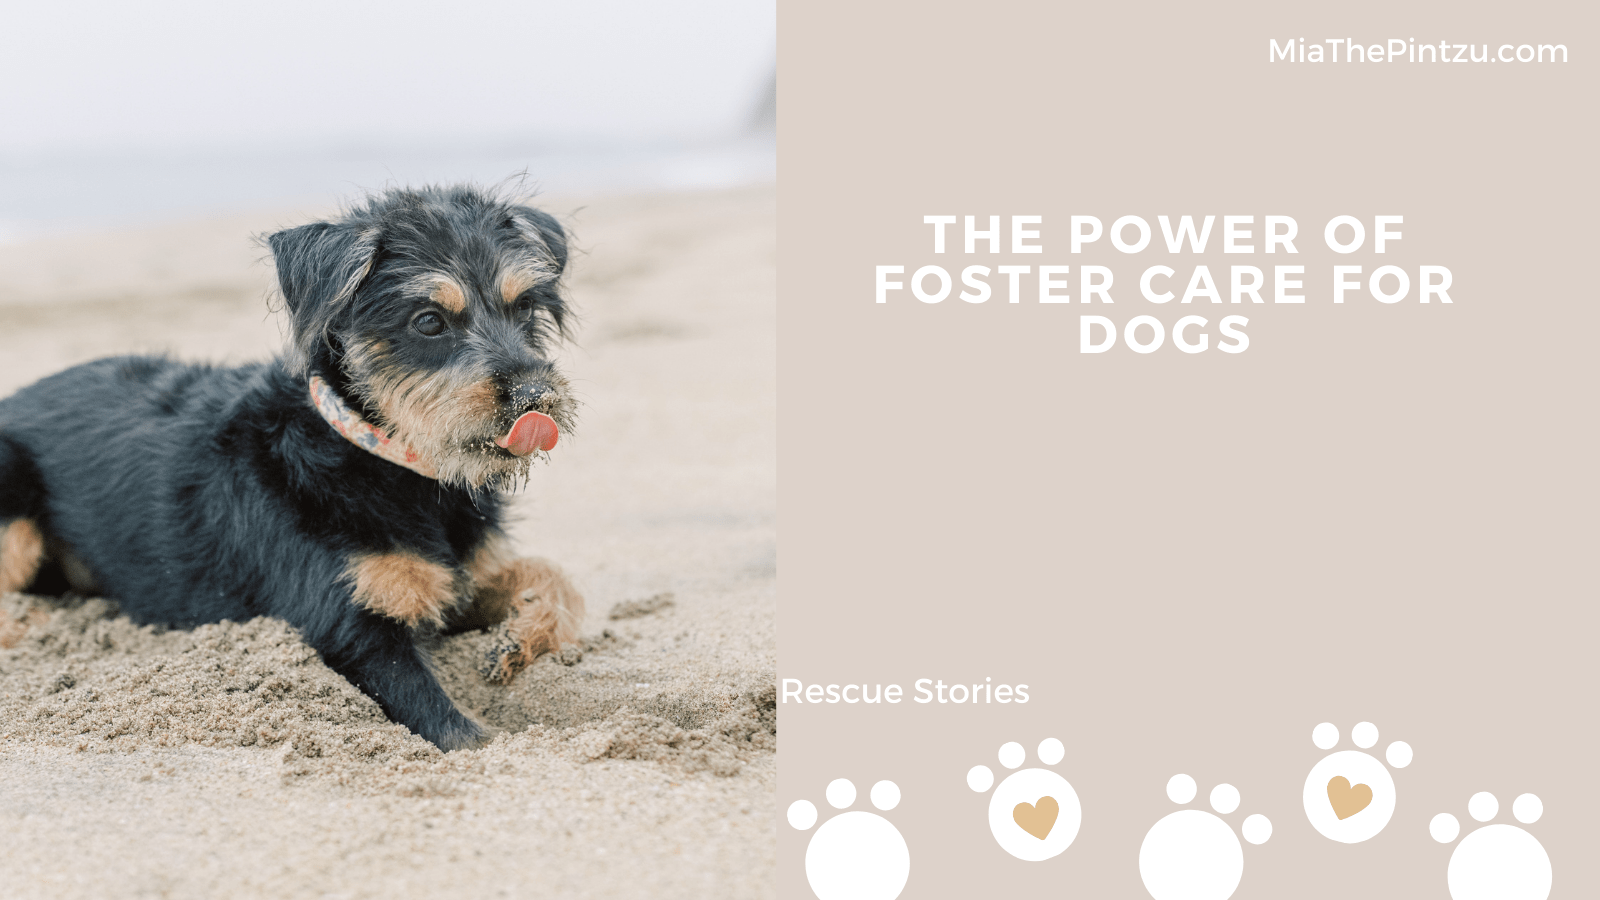 The Power of Foster Care for Dogs